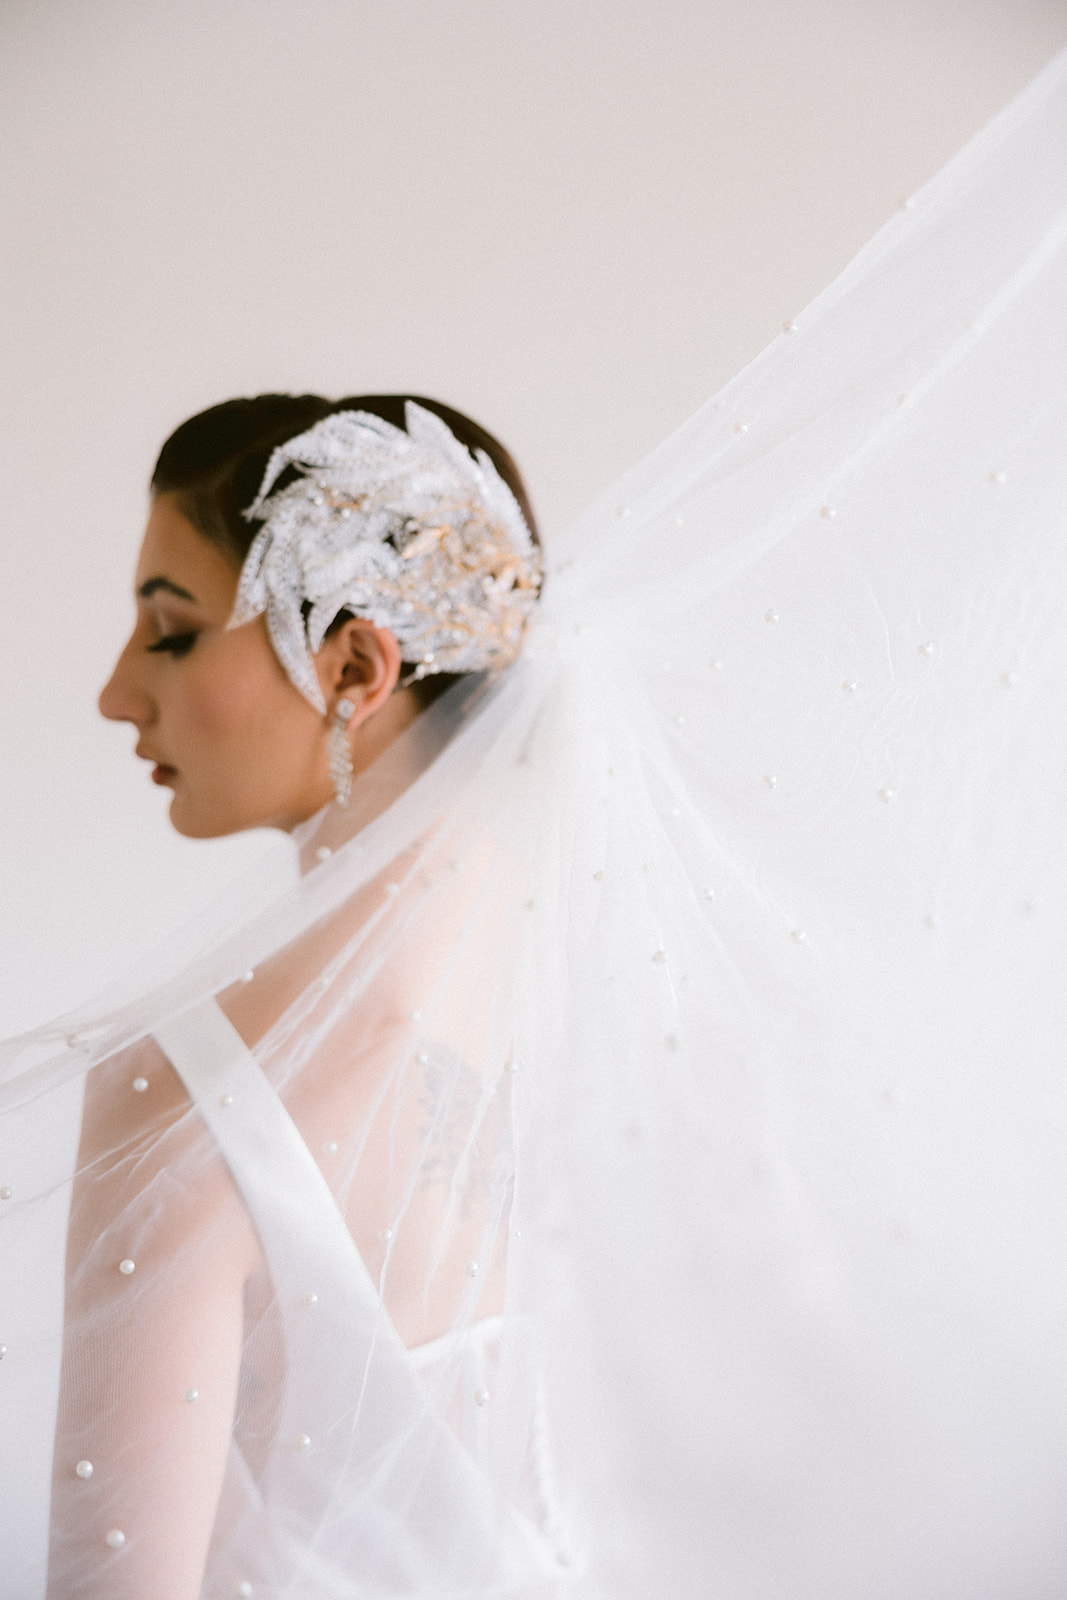 A closeup of our bride's swan lake inspired headpiece and pearl-studded veil.